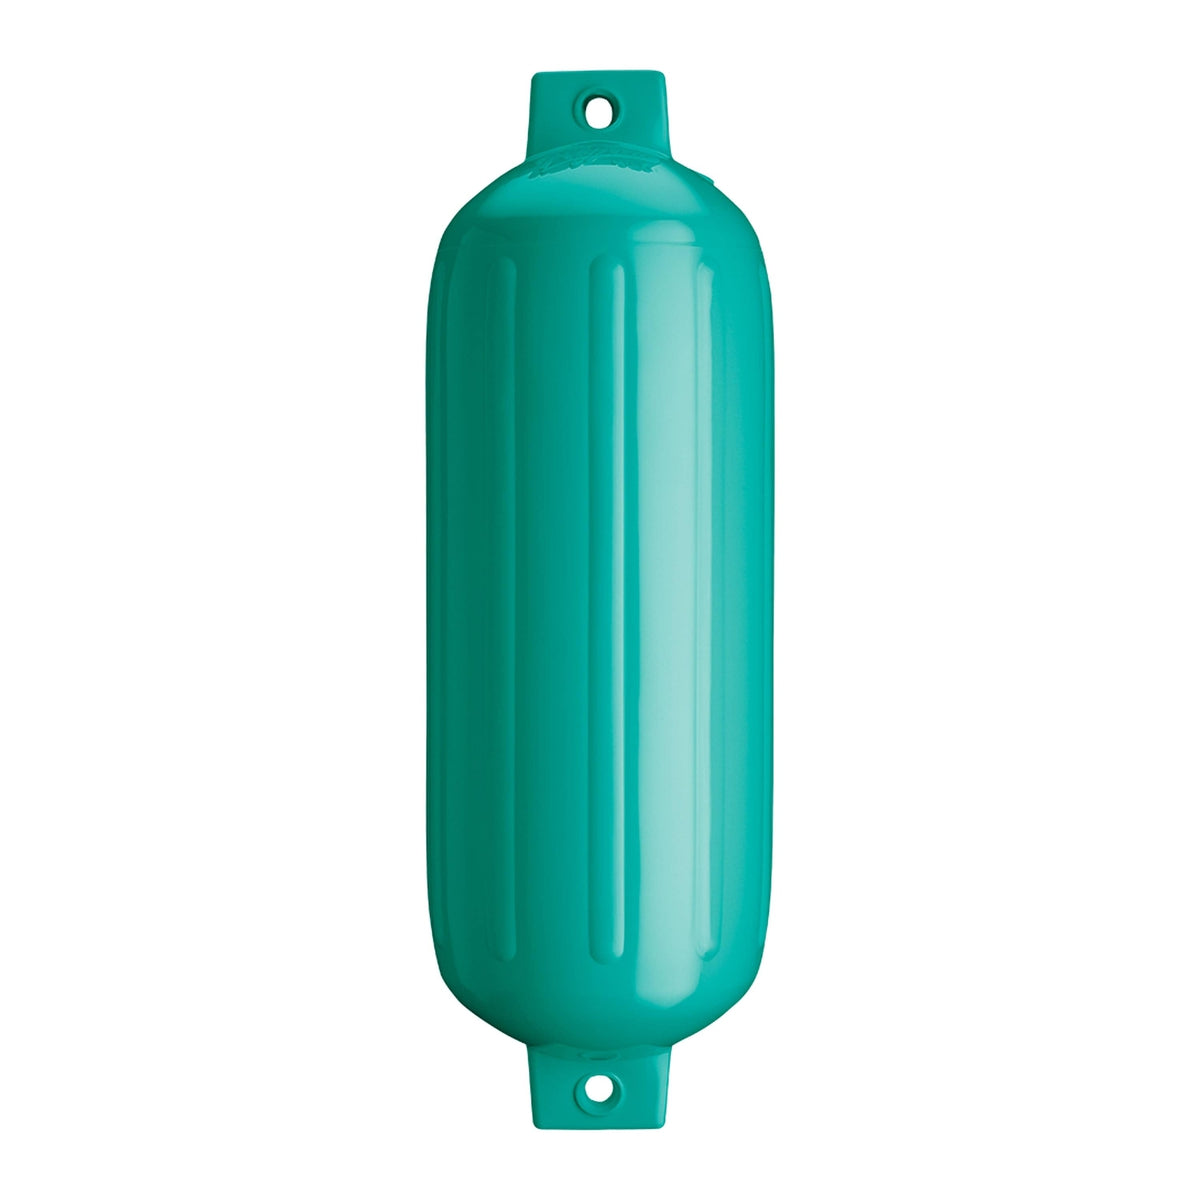 Polyform U.S. Qualifies for Free Shipping Polyform G-5 G-Series Fender 8.8" x 26.8" Teal #G-5-TEAL